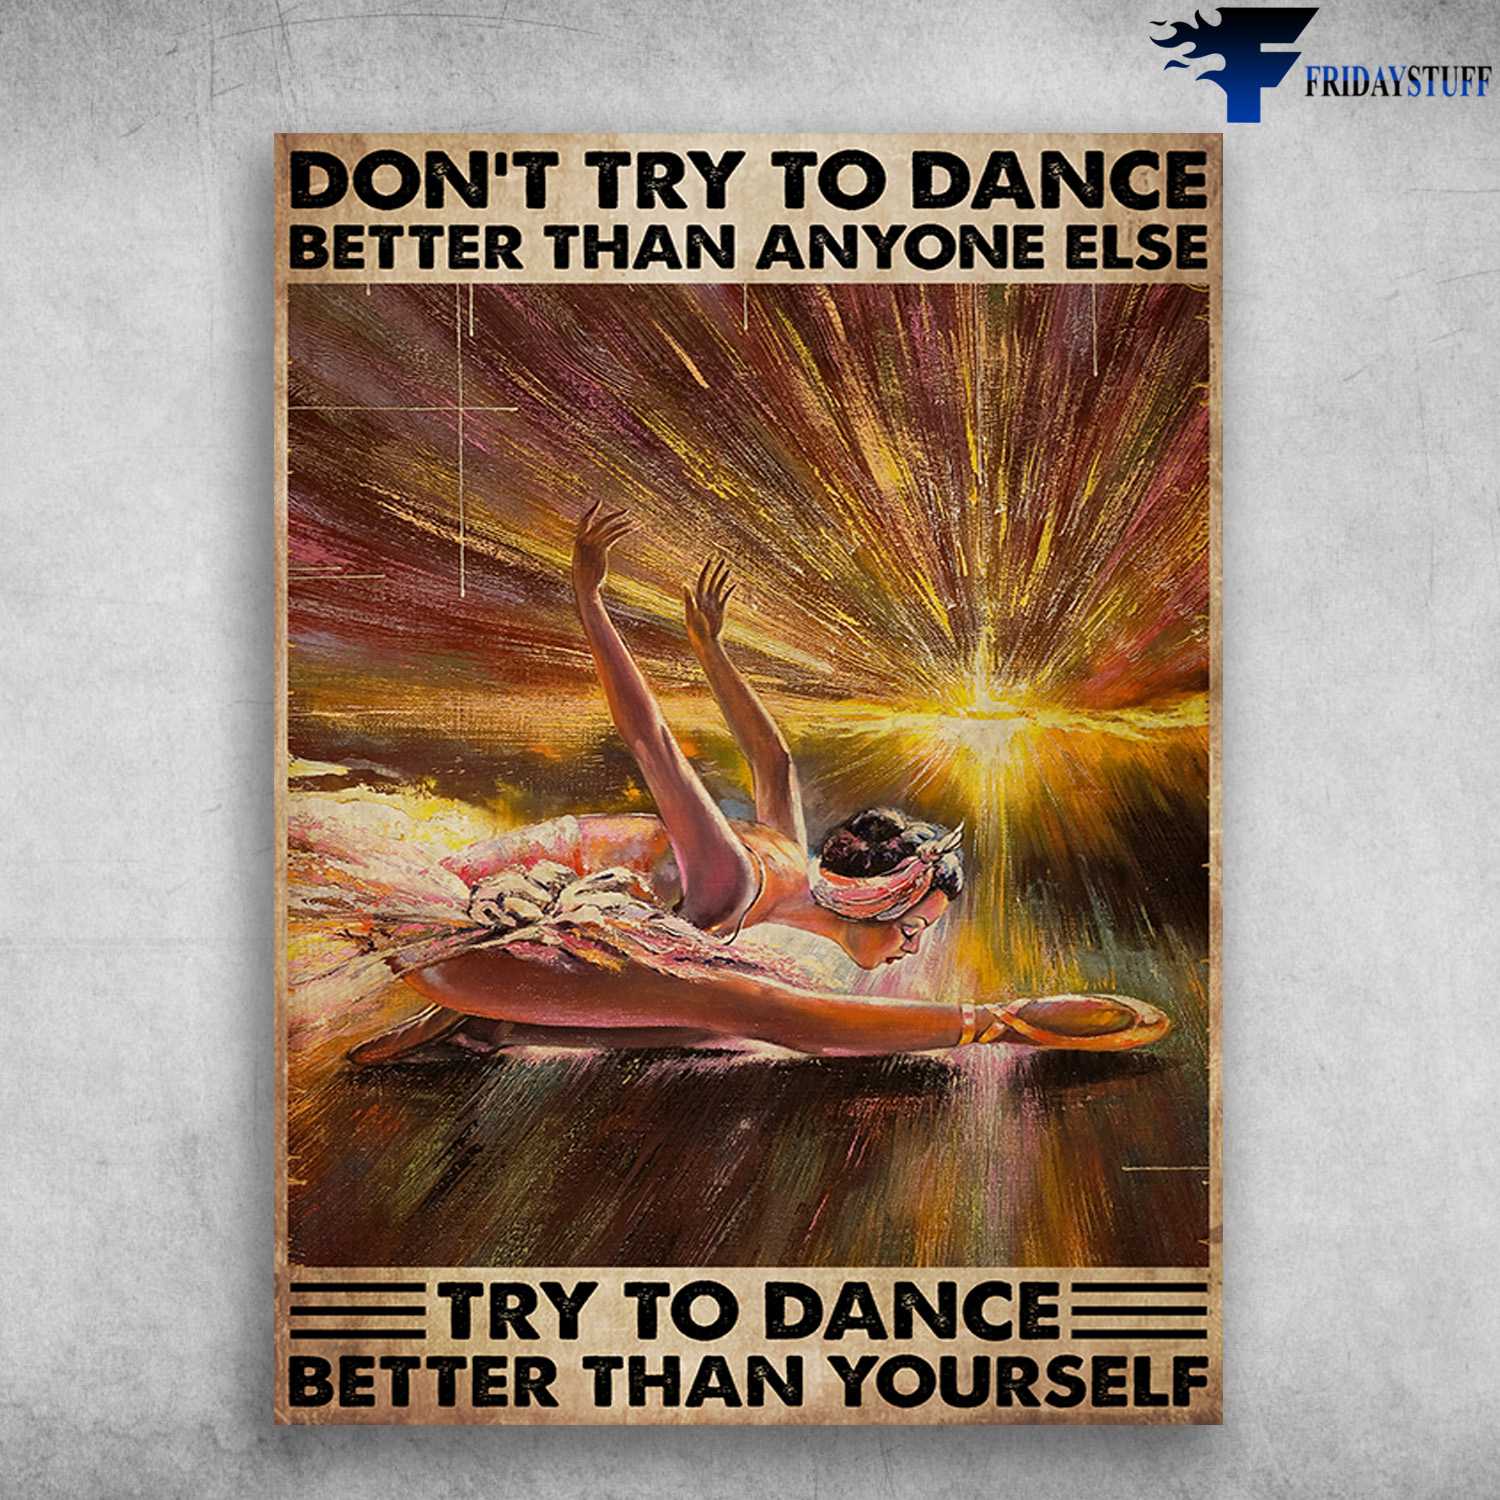 Ballet Girl, Ballet Poster, Don't Try Dance Better Than Anyone Else, Try To Dance Better Than Yourself